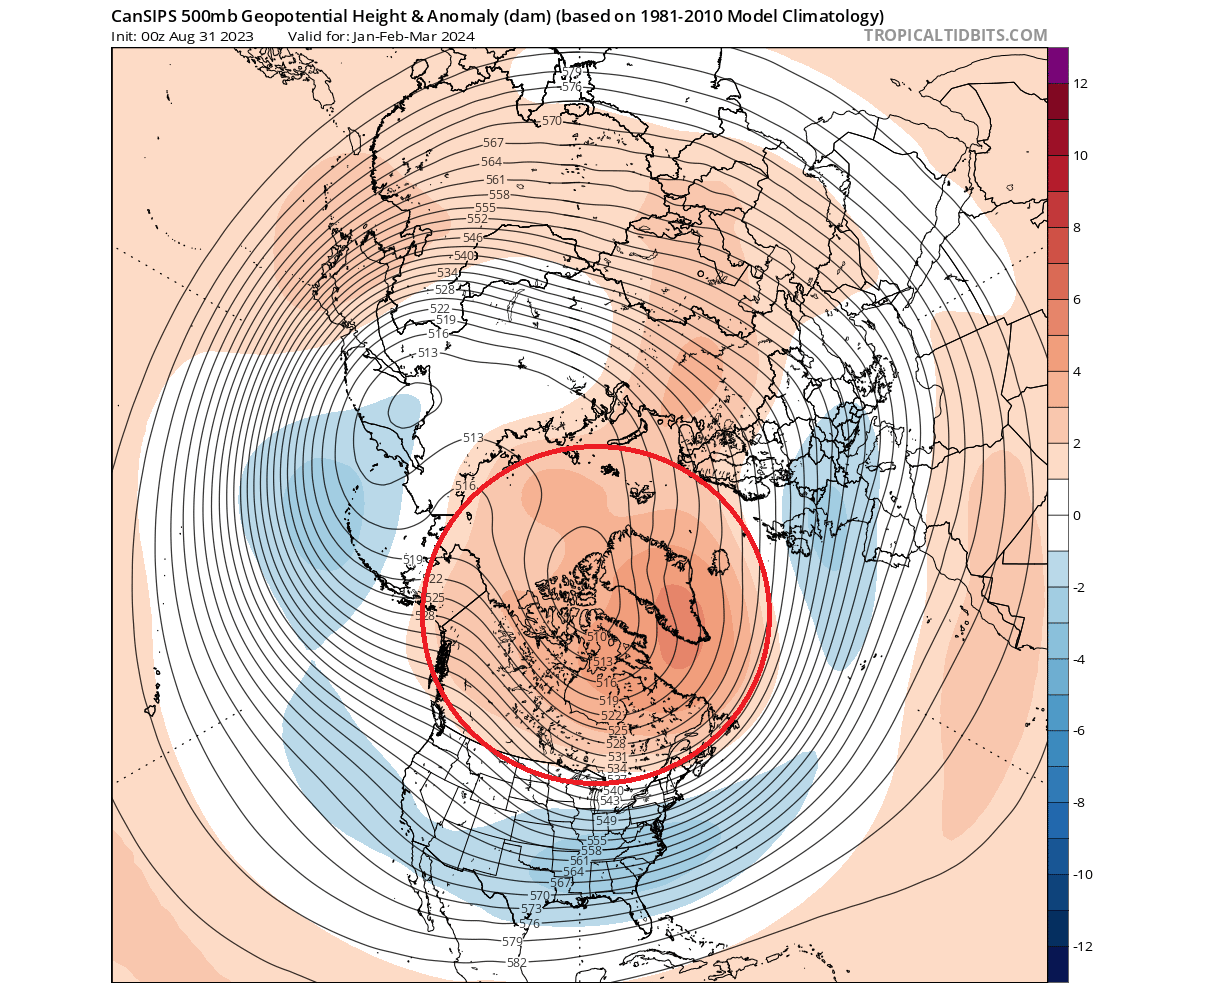 winter-forecast-global-pressure-pattern-anomaly-2023-2024-season-cansips-update